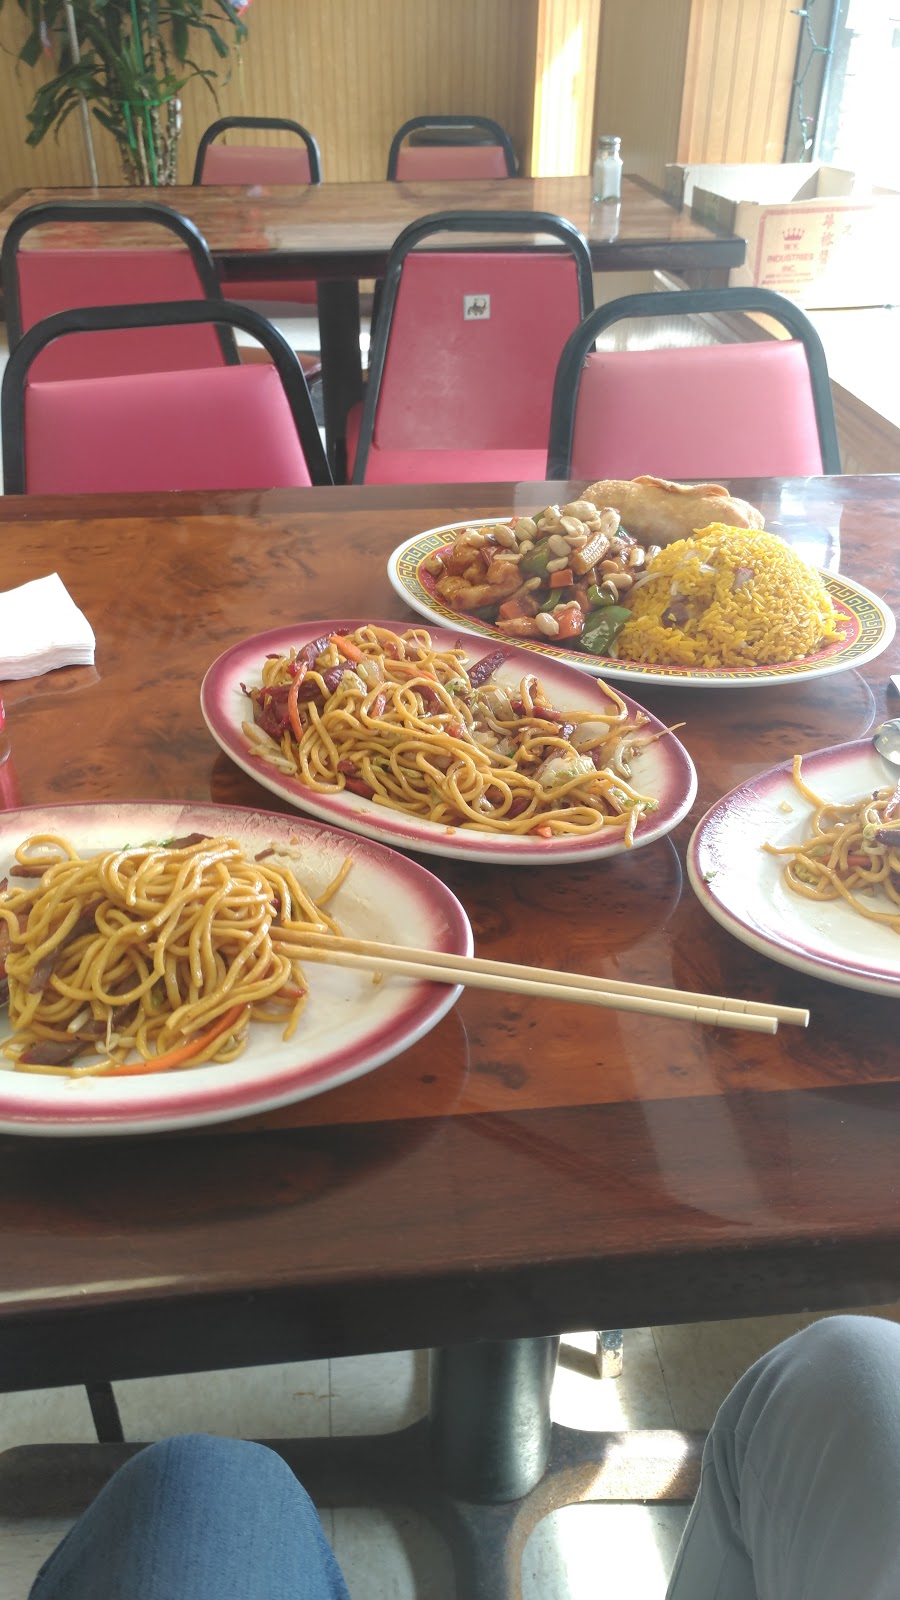 Cheong Hing Kitchen | 225 West St, Seymour, CT 06483 | Phone: (203) 888-1148